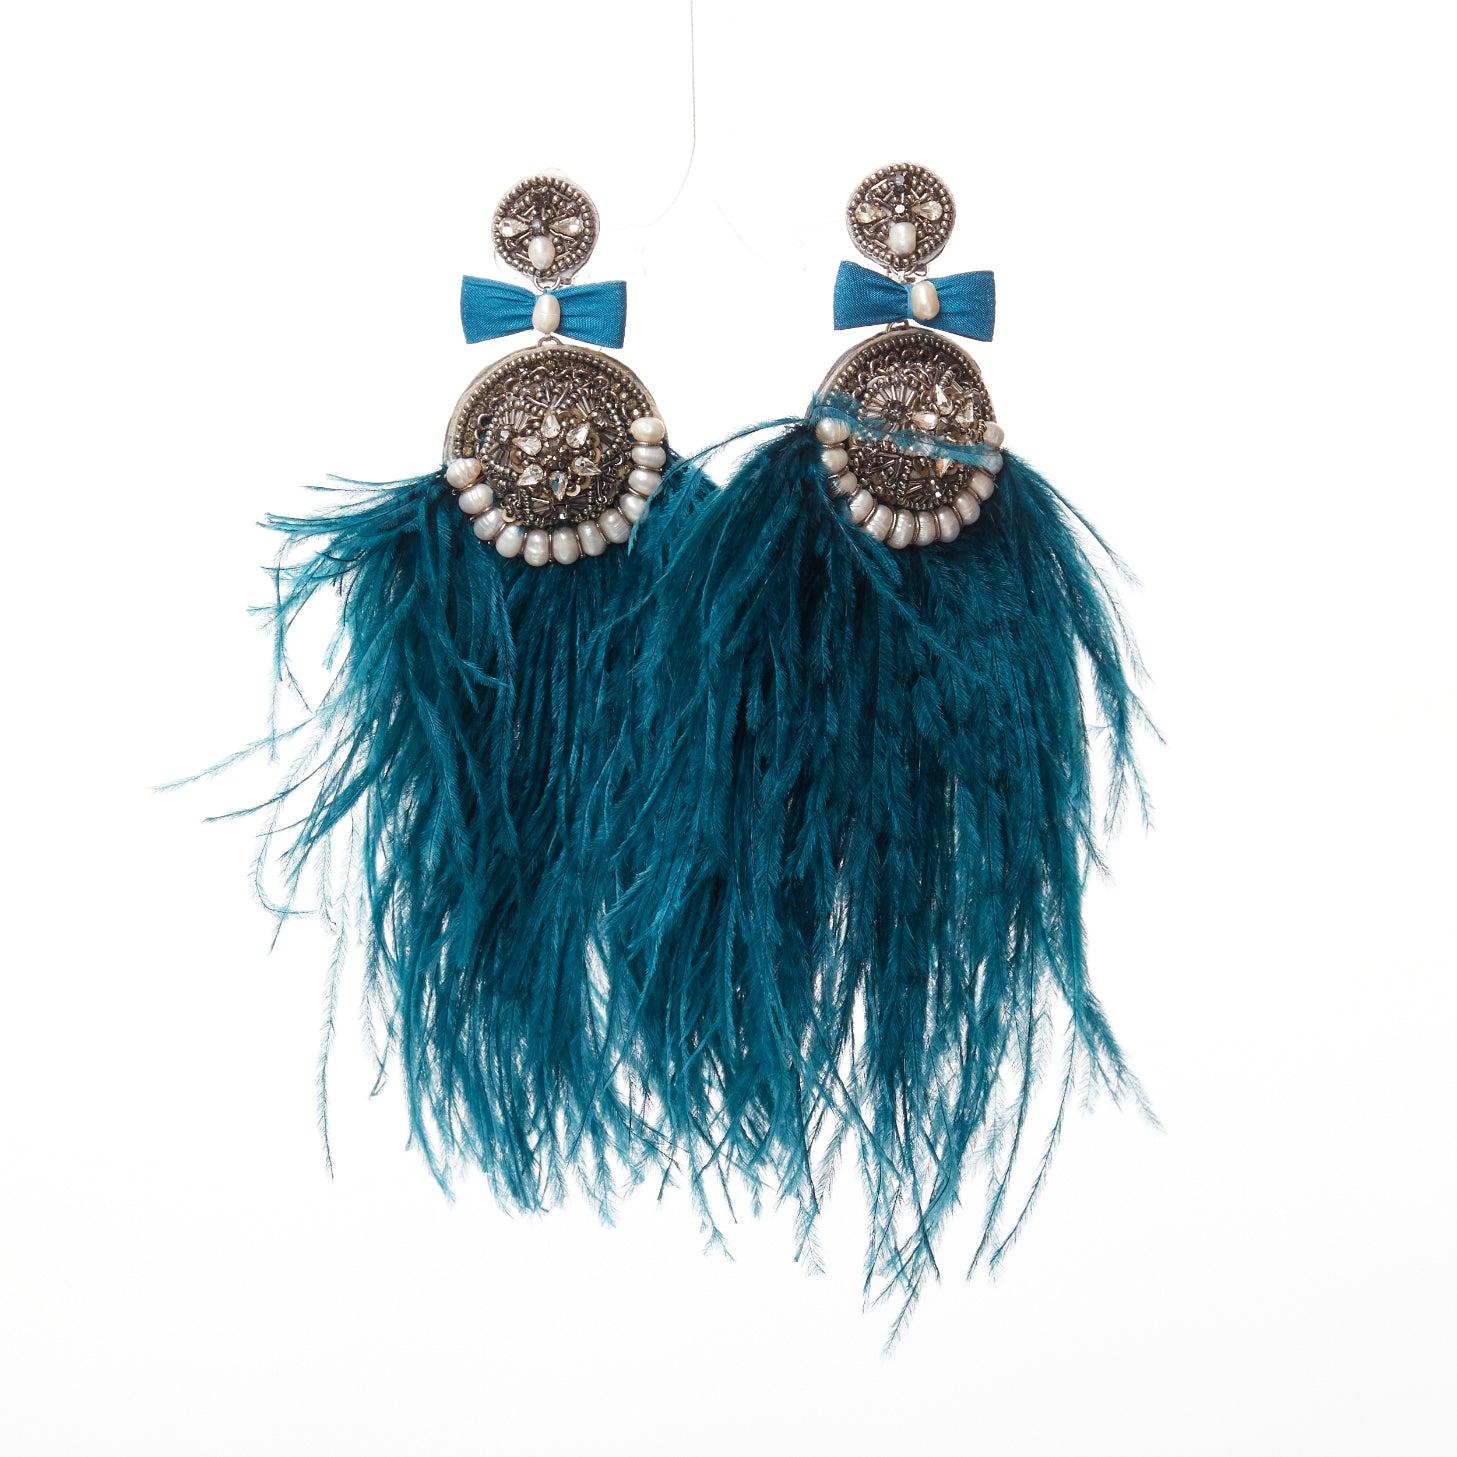 RANJANA KHAN turquoise blue feather faux pearl dangling clip on earrings
Reference: AAWC/A01219
Brand: Ranjana Khan
Material: Feather
Color: Green, Blue
Pattern: Feather
Closure: Clip On
Lining: Black Leather
Extra Details: Black leather